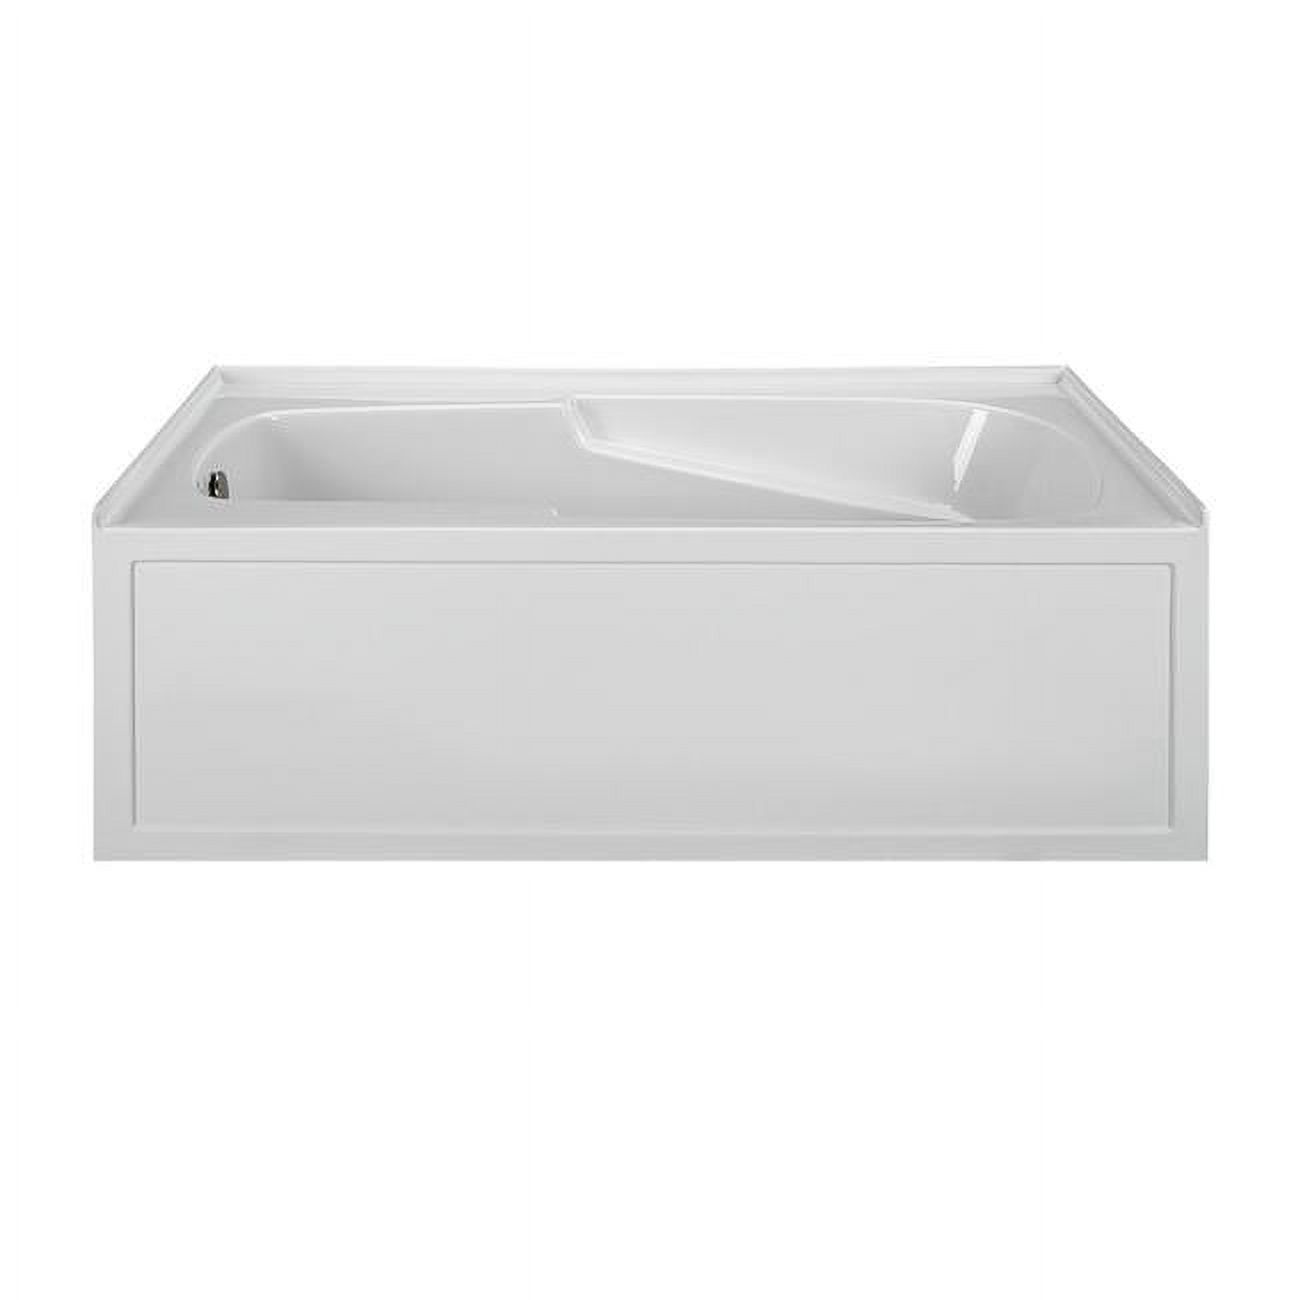 Integral Skirted End Drain Air Bath, Biscuit - 60 x 42 x 20.25 in. - Right Hand - image 1 of 1